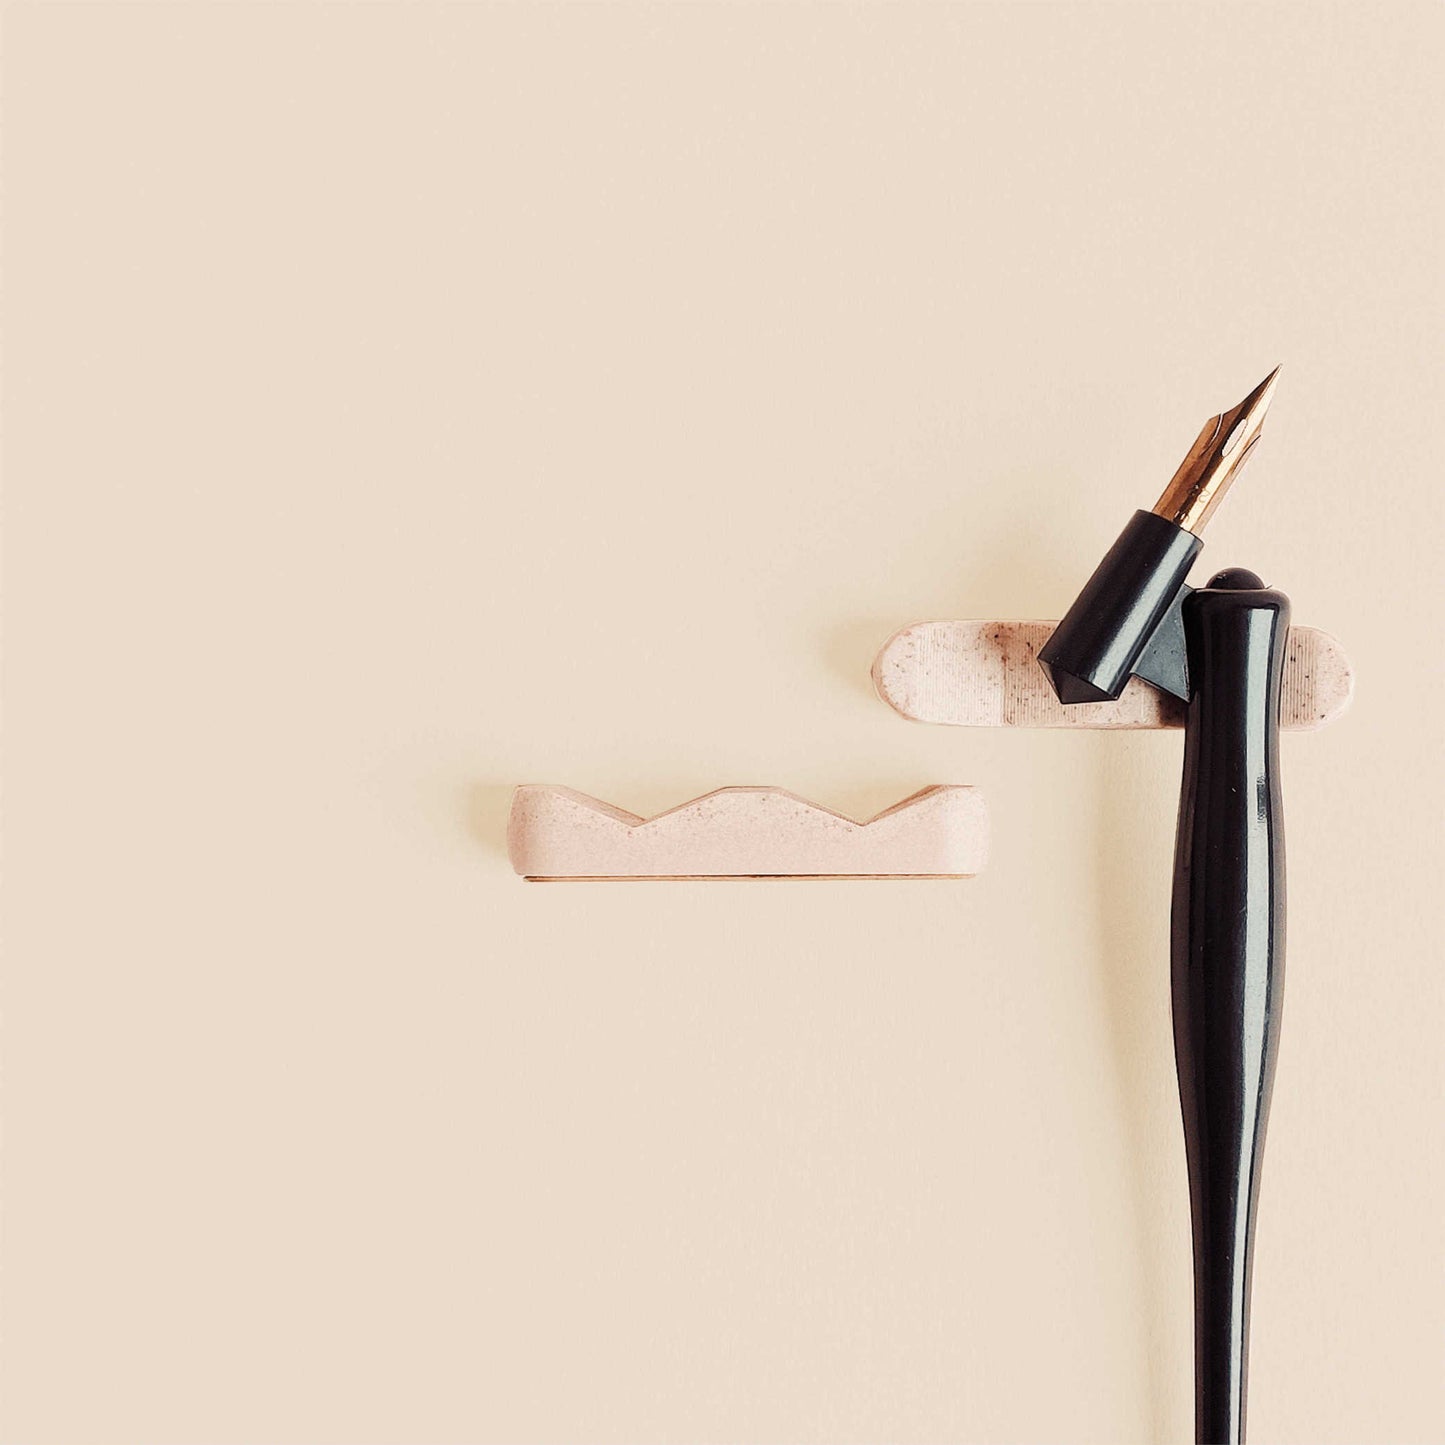 Pen Rest For Tools - Rose